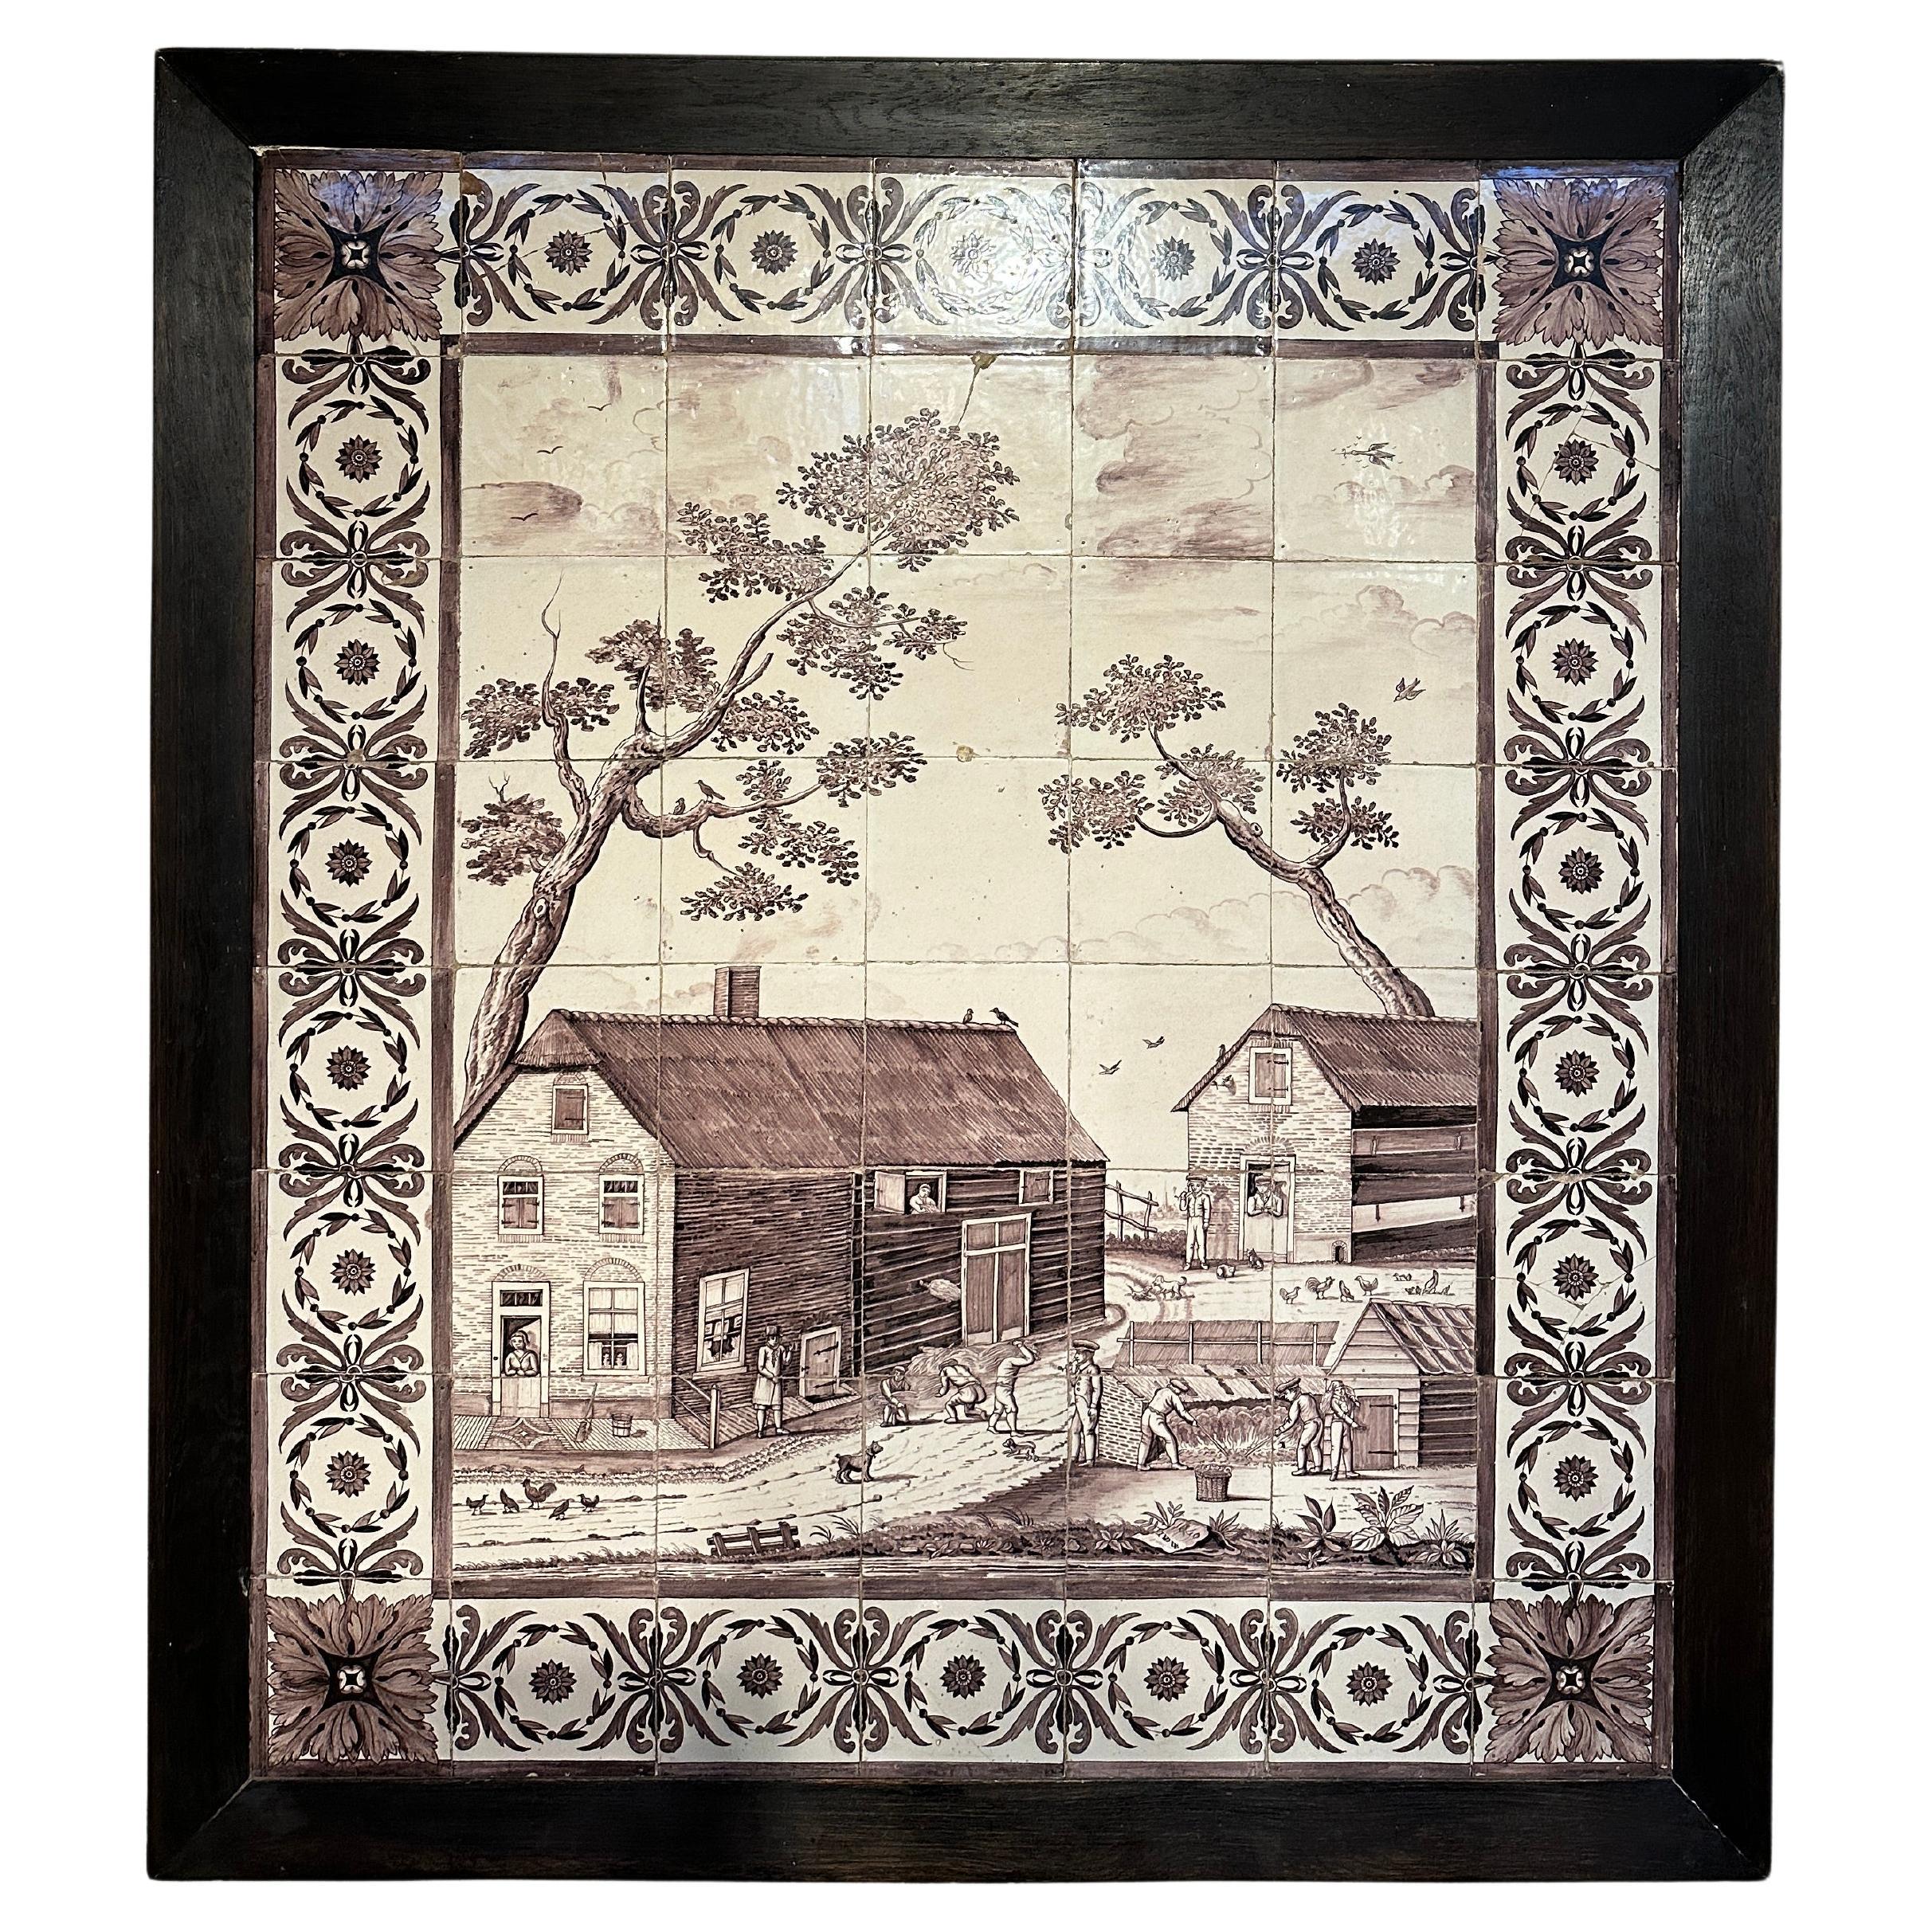 Rare and Important Dutch Tile Panel of a Dutch Farmhouse, Signed and Dated 1840 For Sale